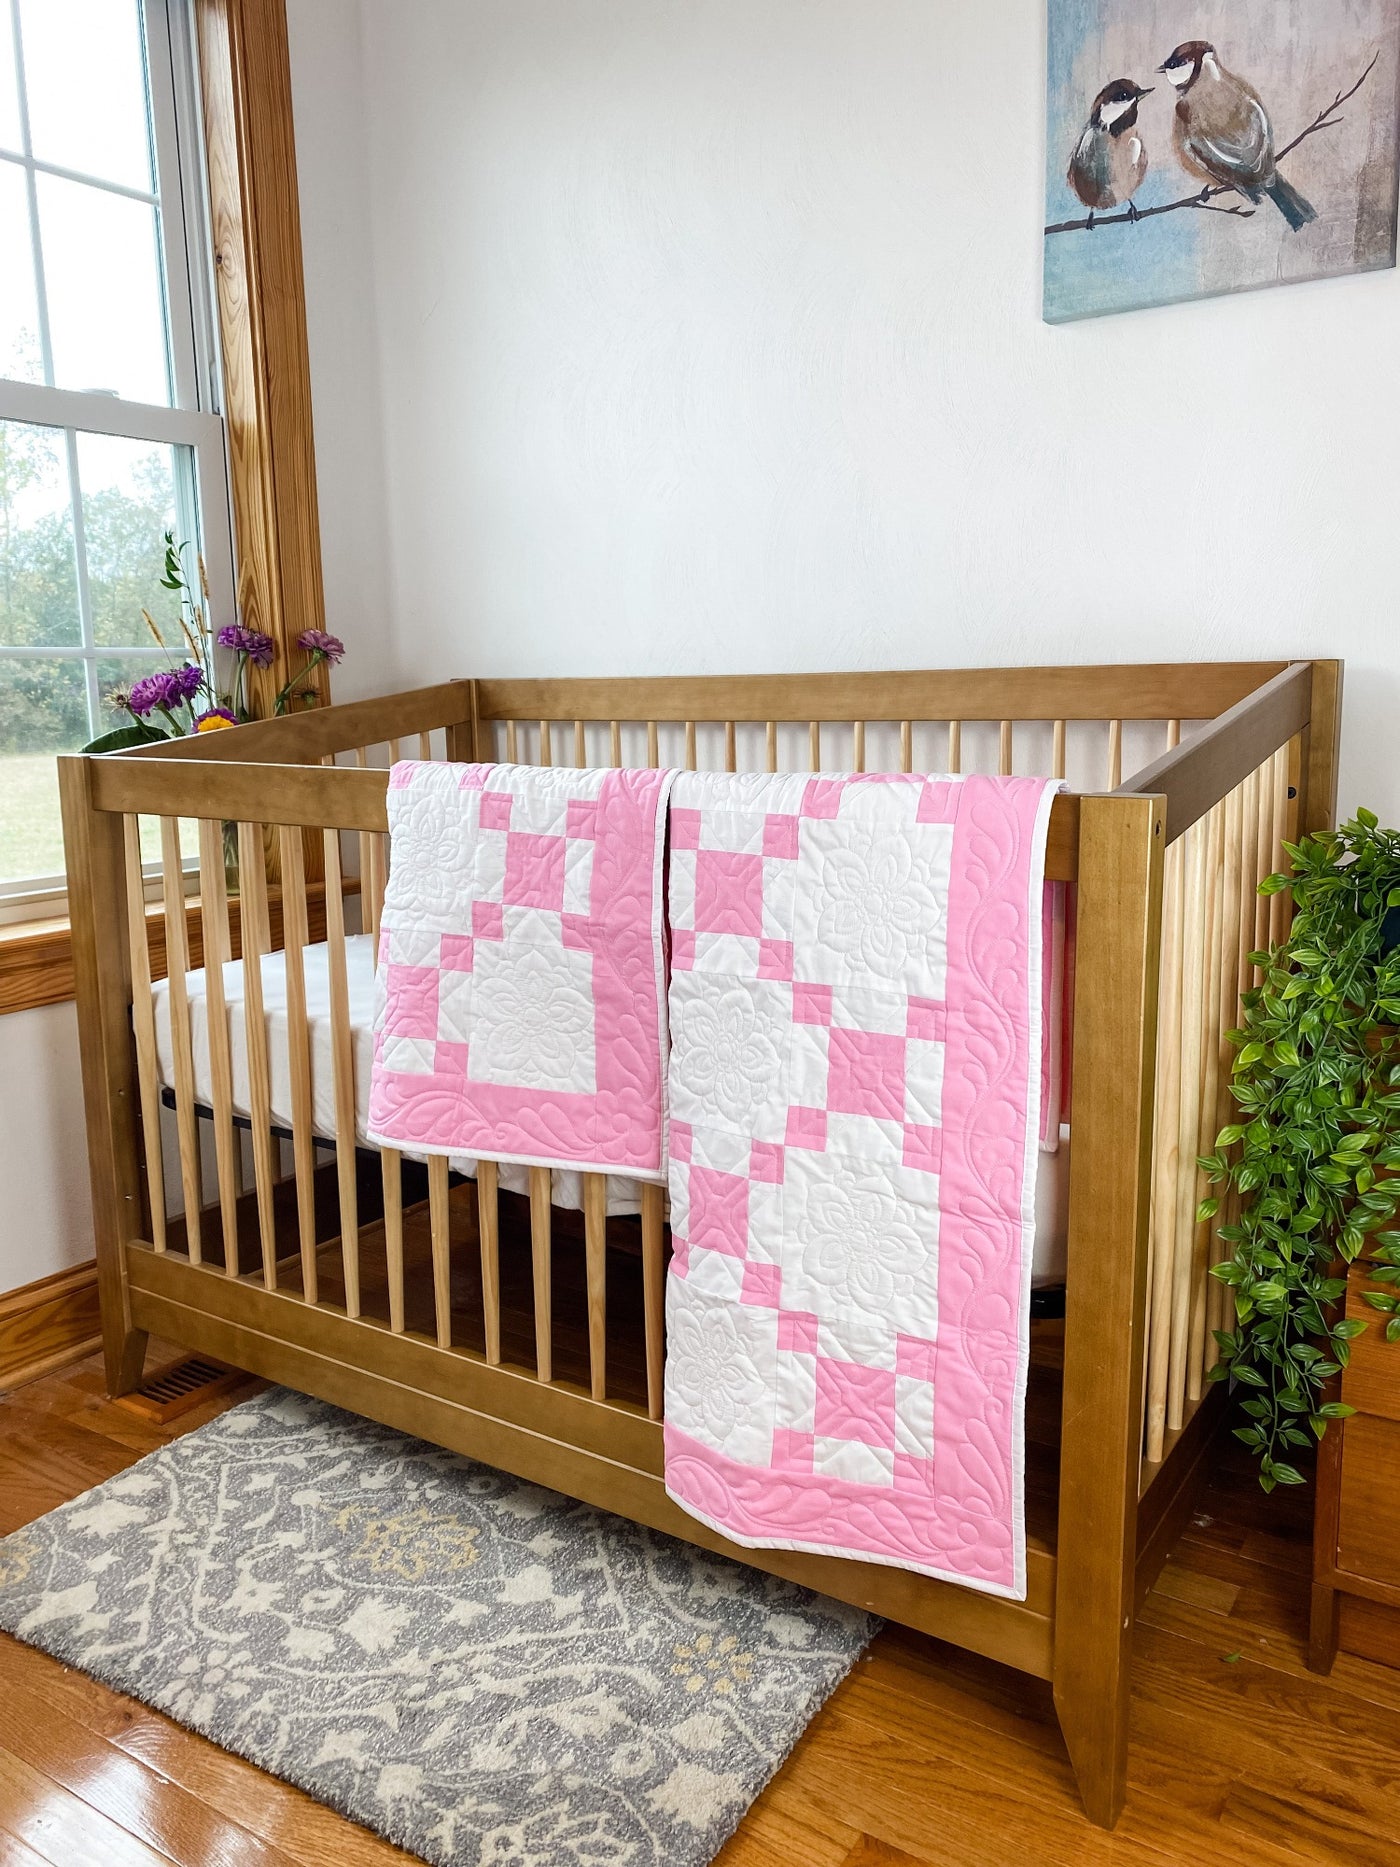 A handmade, heirloom, patchwork of pink nine patch with white background fabric, white backing, 100% cotton batting, Floral top quilting in the white centers, X's in the 9 patch squares, and feathers along the borders, machine top stitched binding, on these baby and crib size quilt